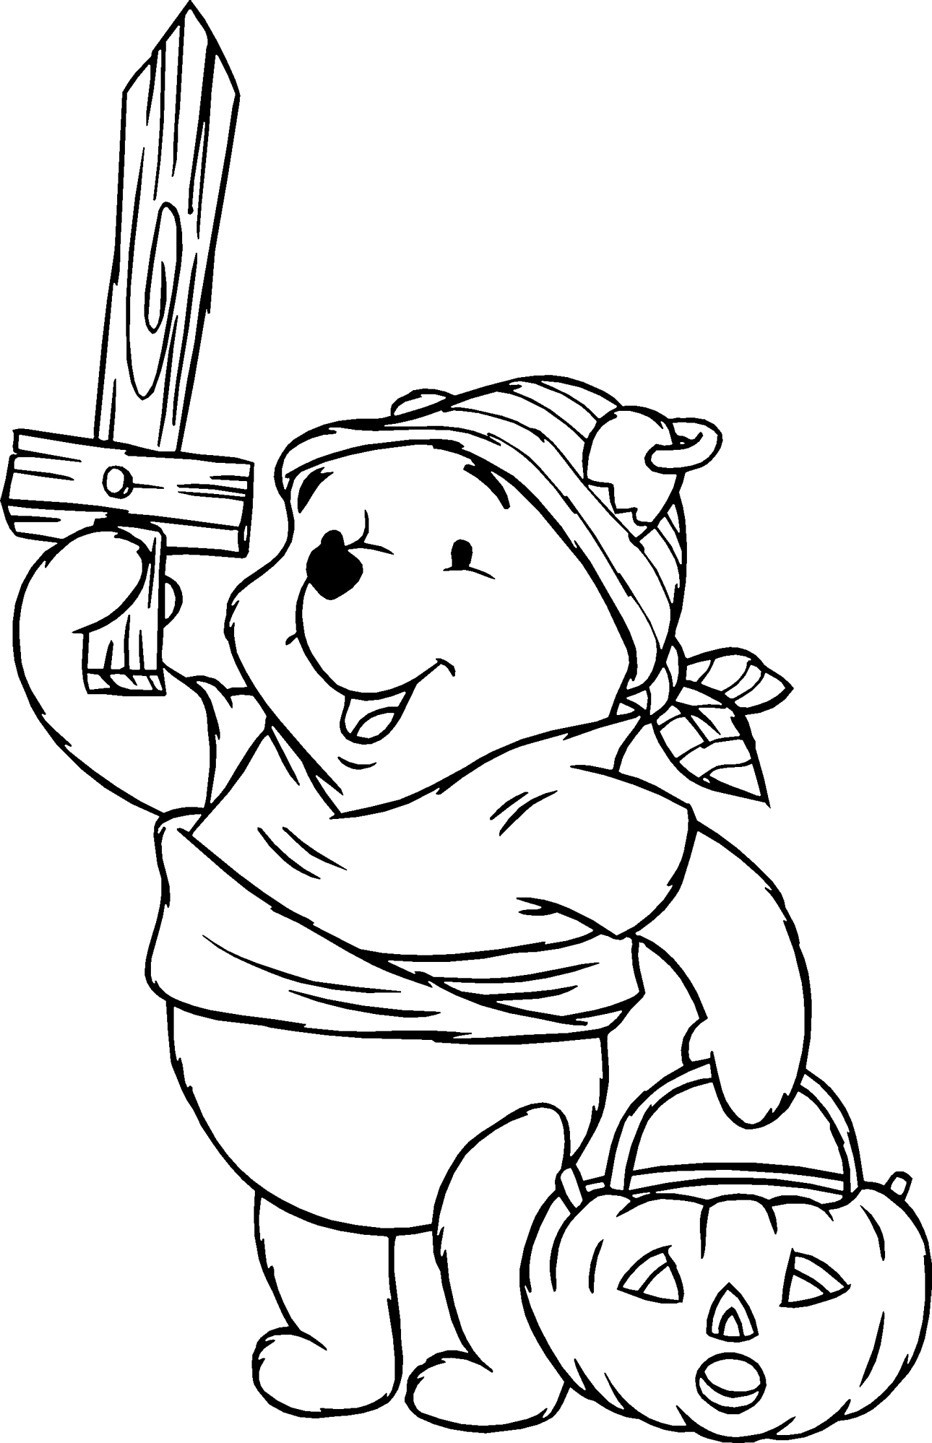 Coloring Pages For Kids Printable
 24 Free Printable Halloween Coloring Pages for Kids